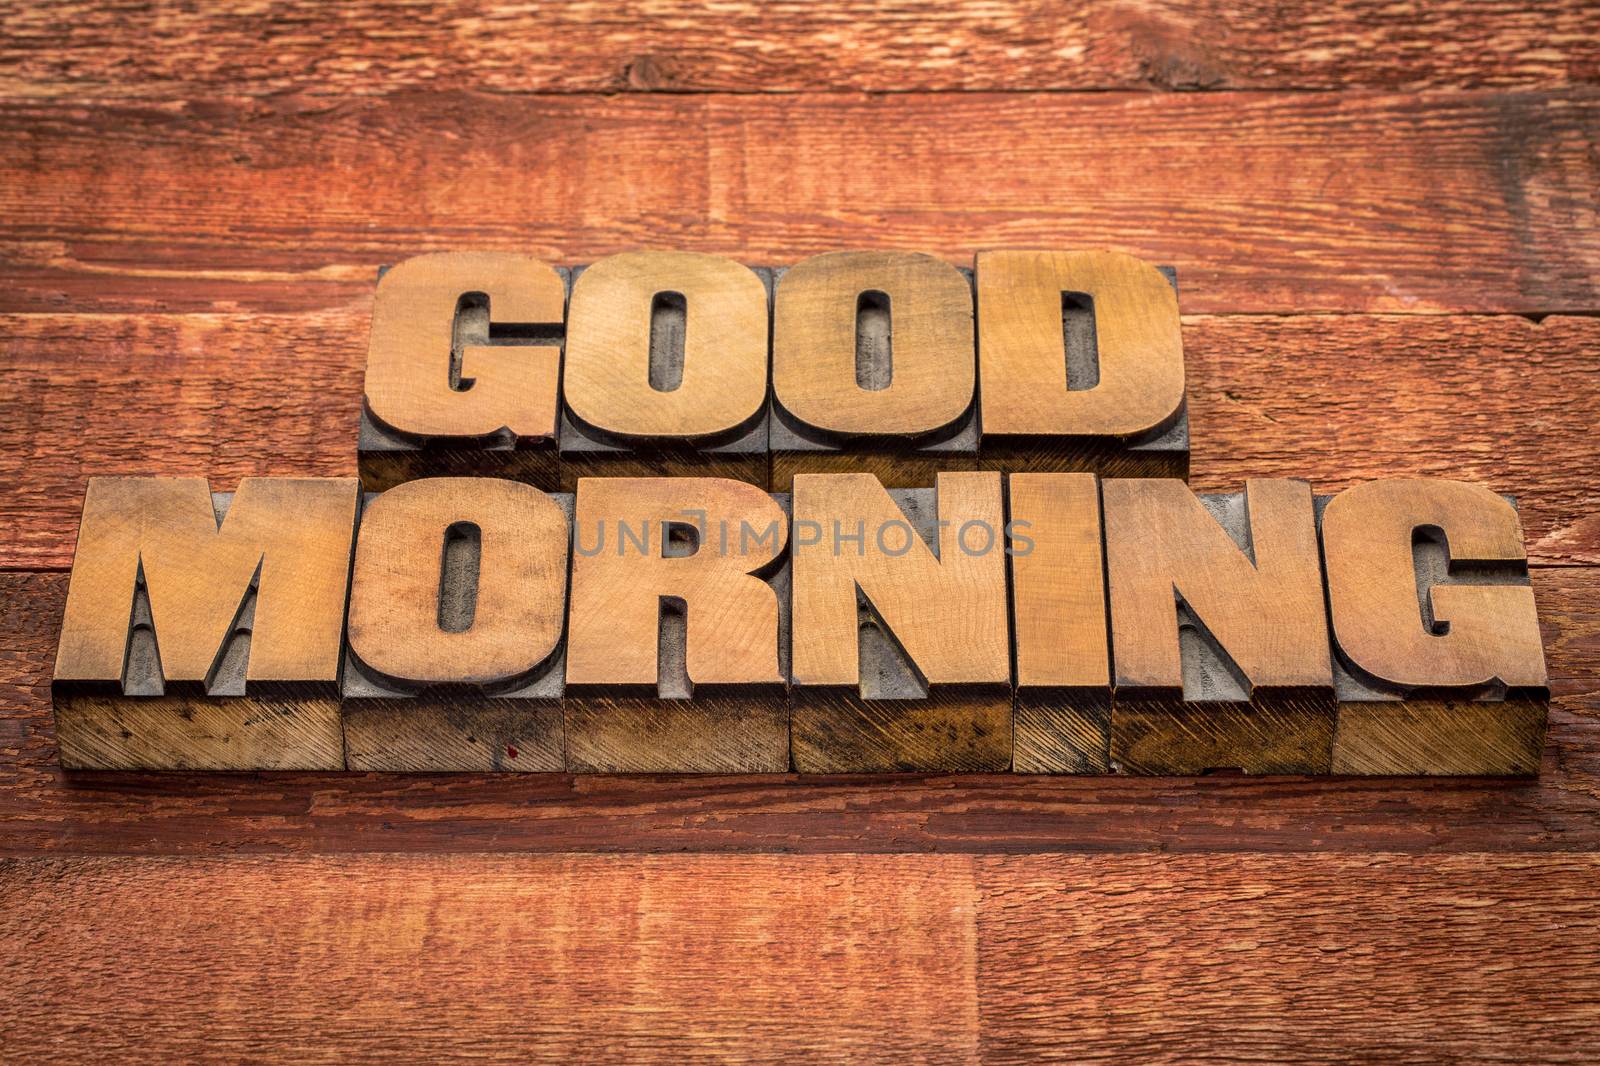 good morning typography - text in vintage letterpress wood type against rustic barn wood table